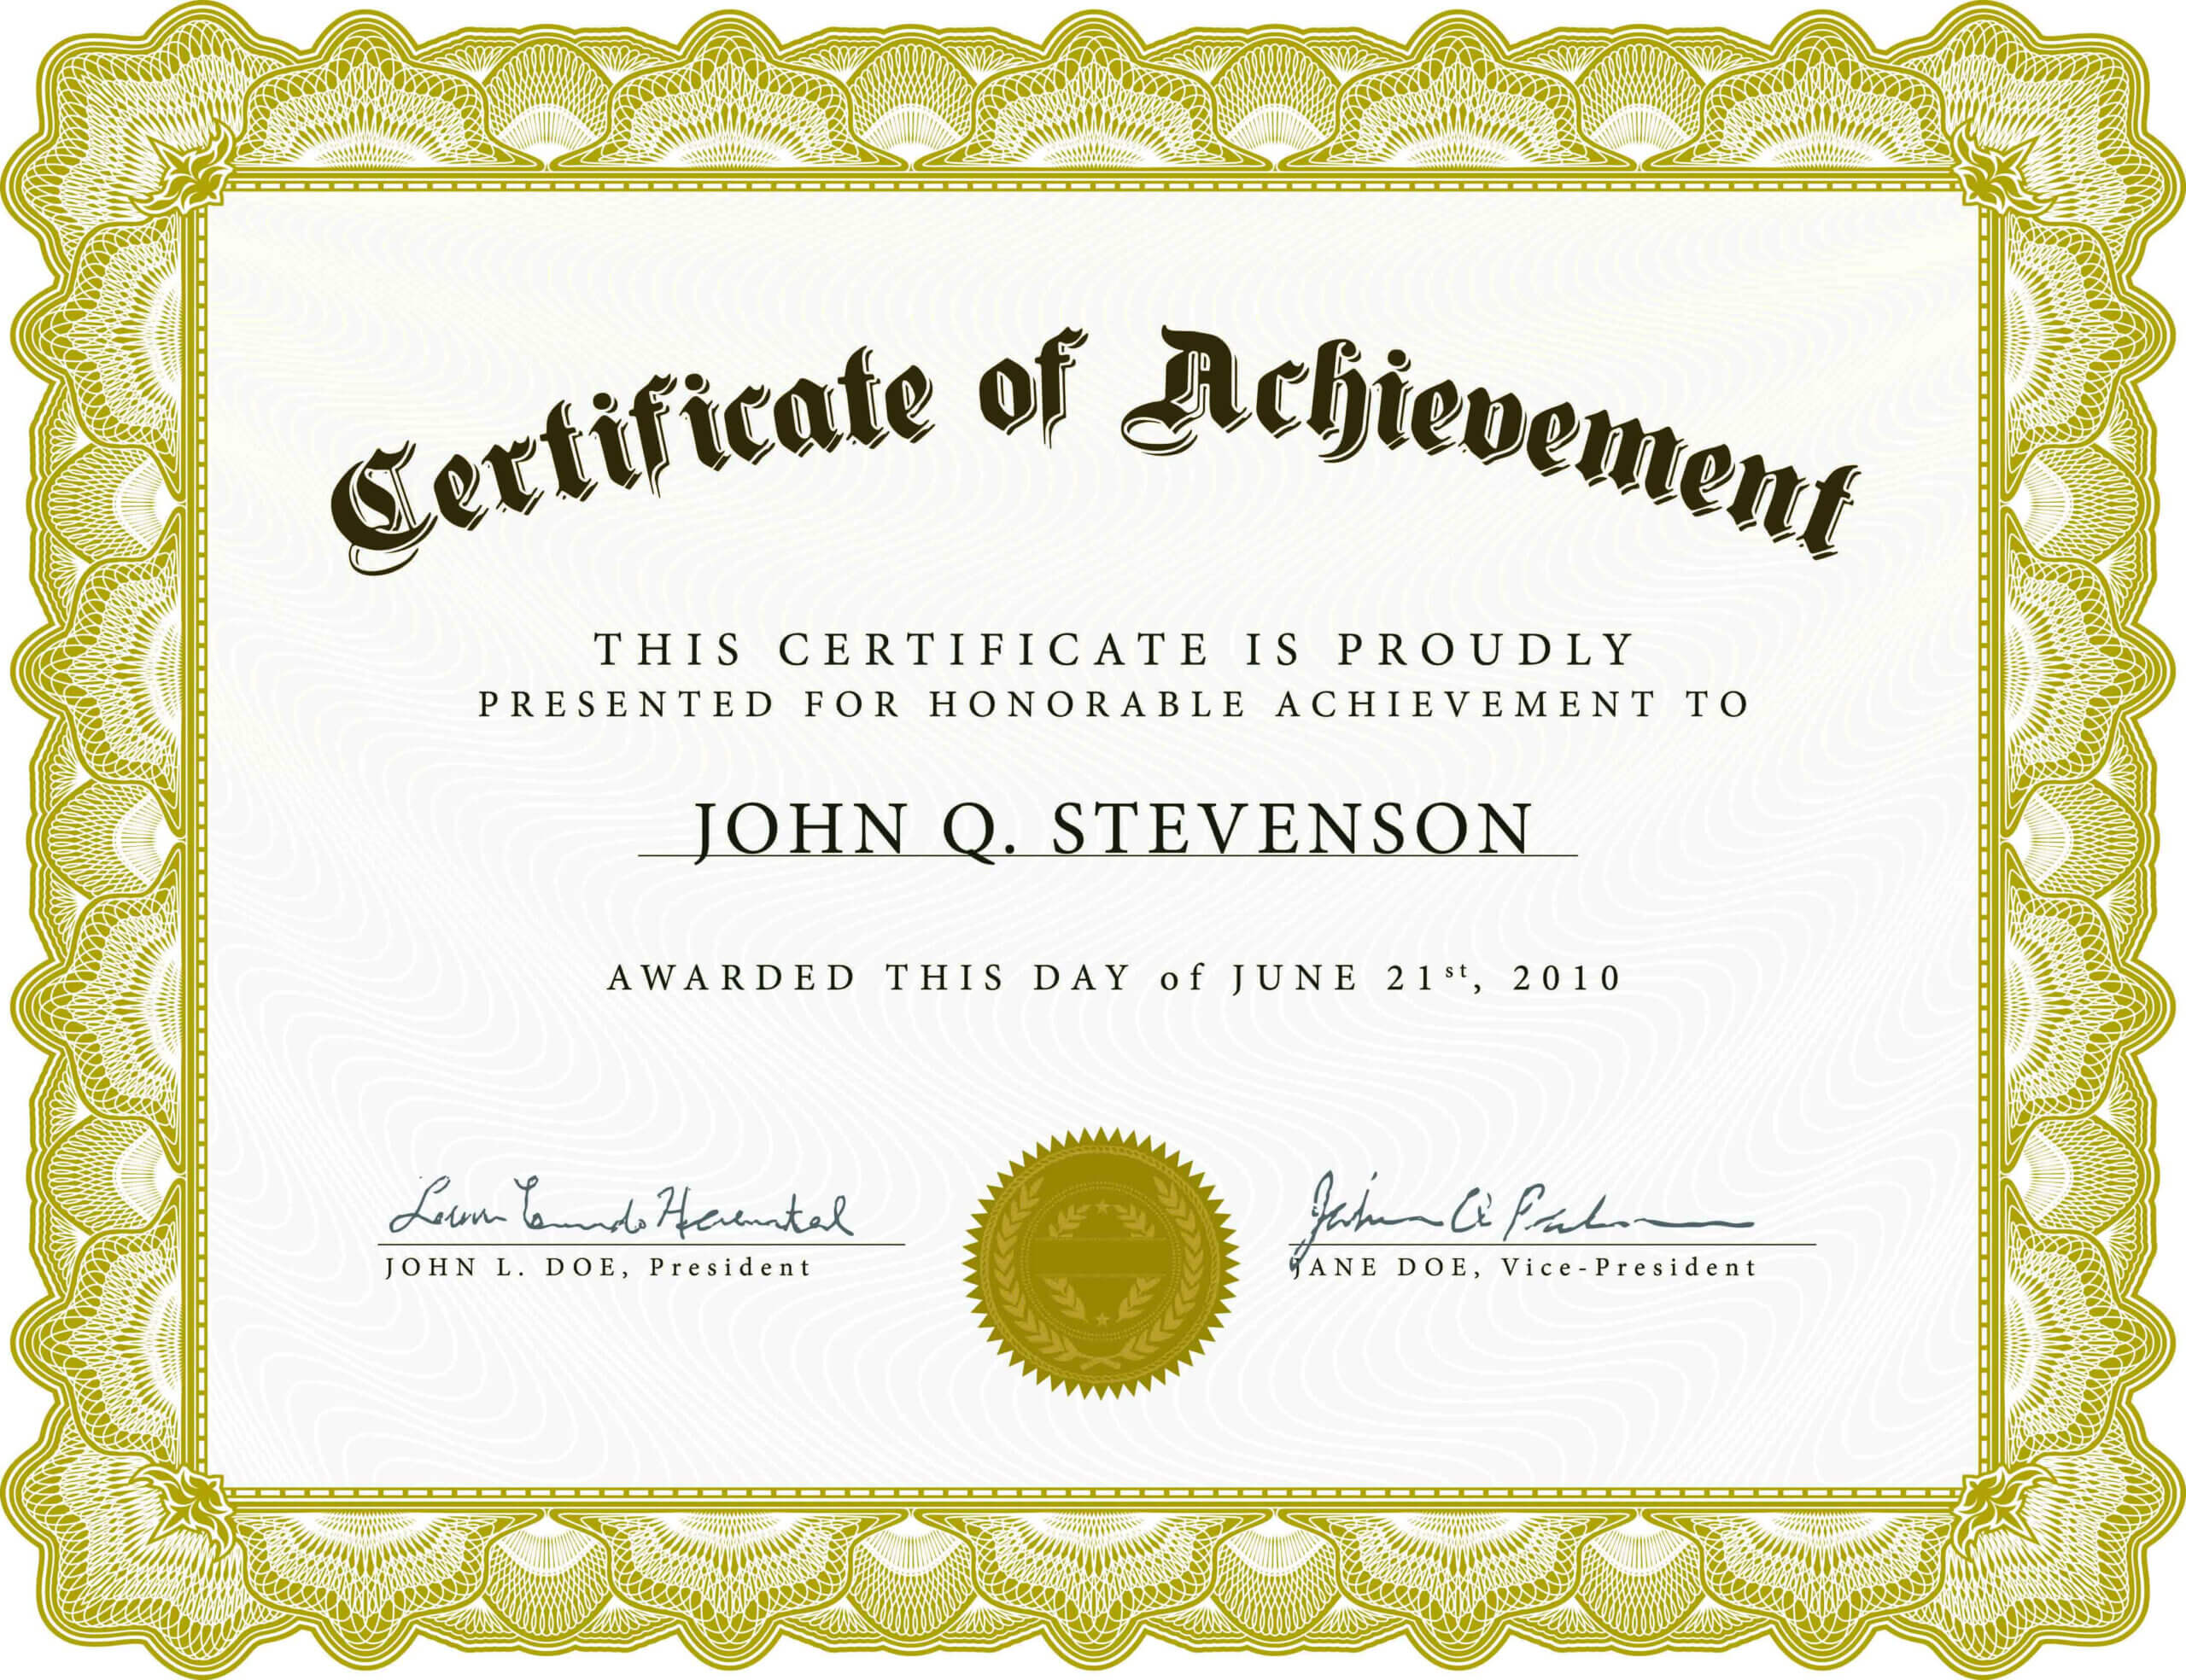 Certificate Of Academic Achievement Template | Photo Stock Throughout Certificate Of Accomplishment Template Free